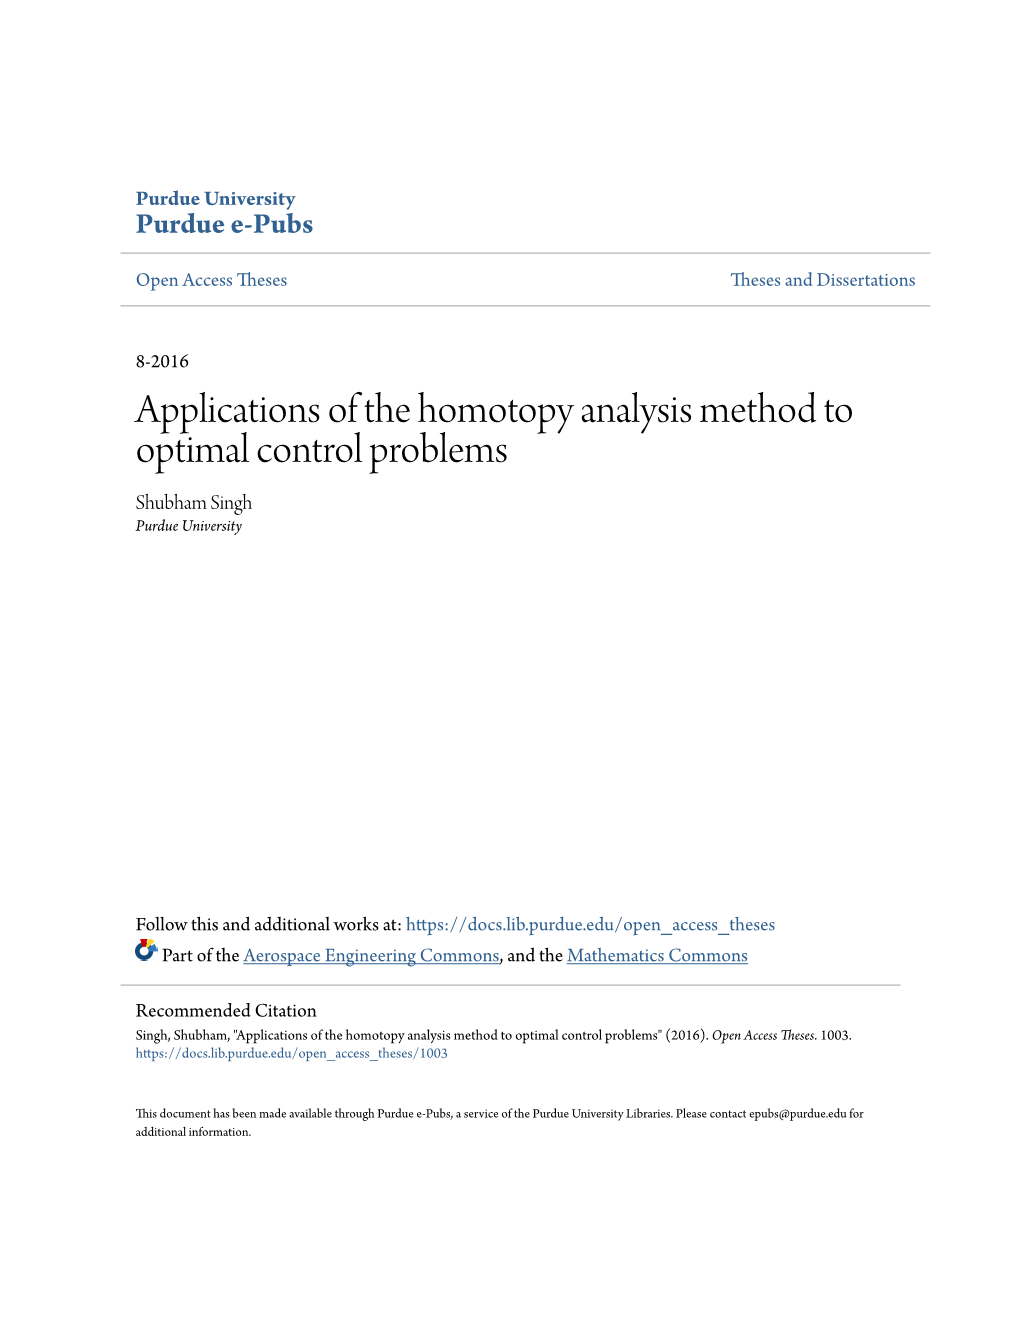 Applications of the Homotopy Analysis Method to Optimal Control Problems Shubham Singh Purdue University